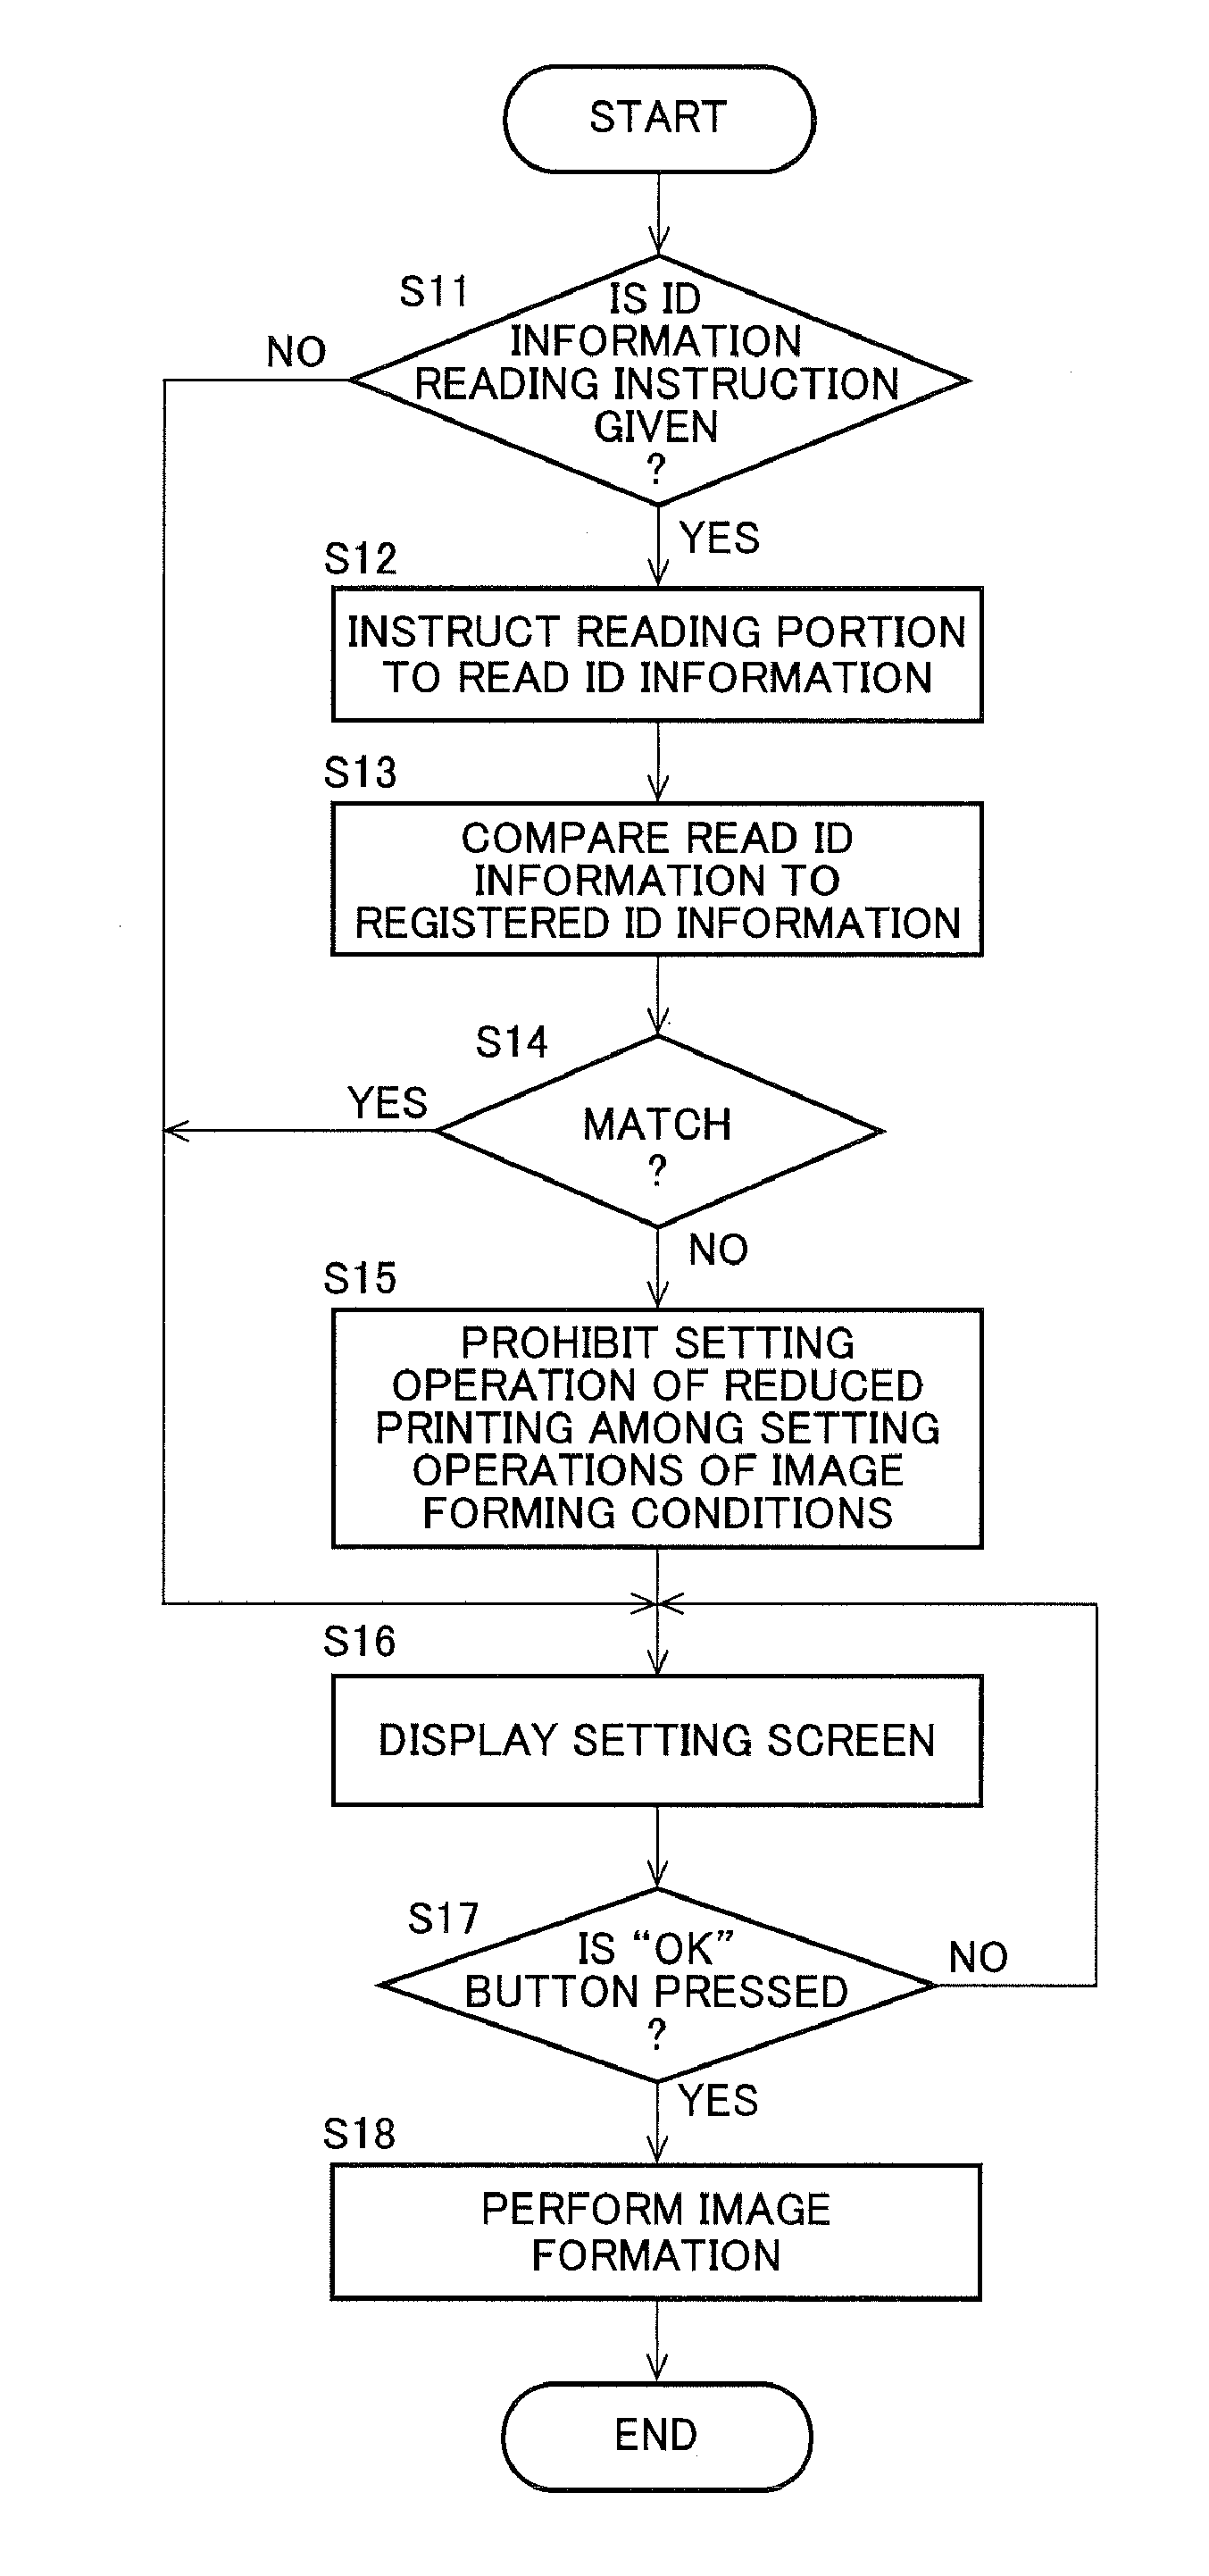 Image forming apparatus, system and method